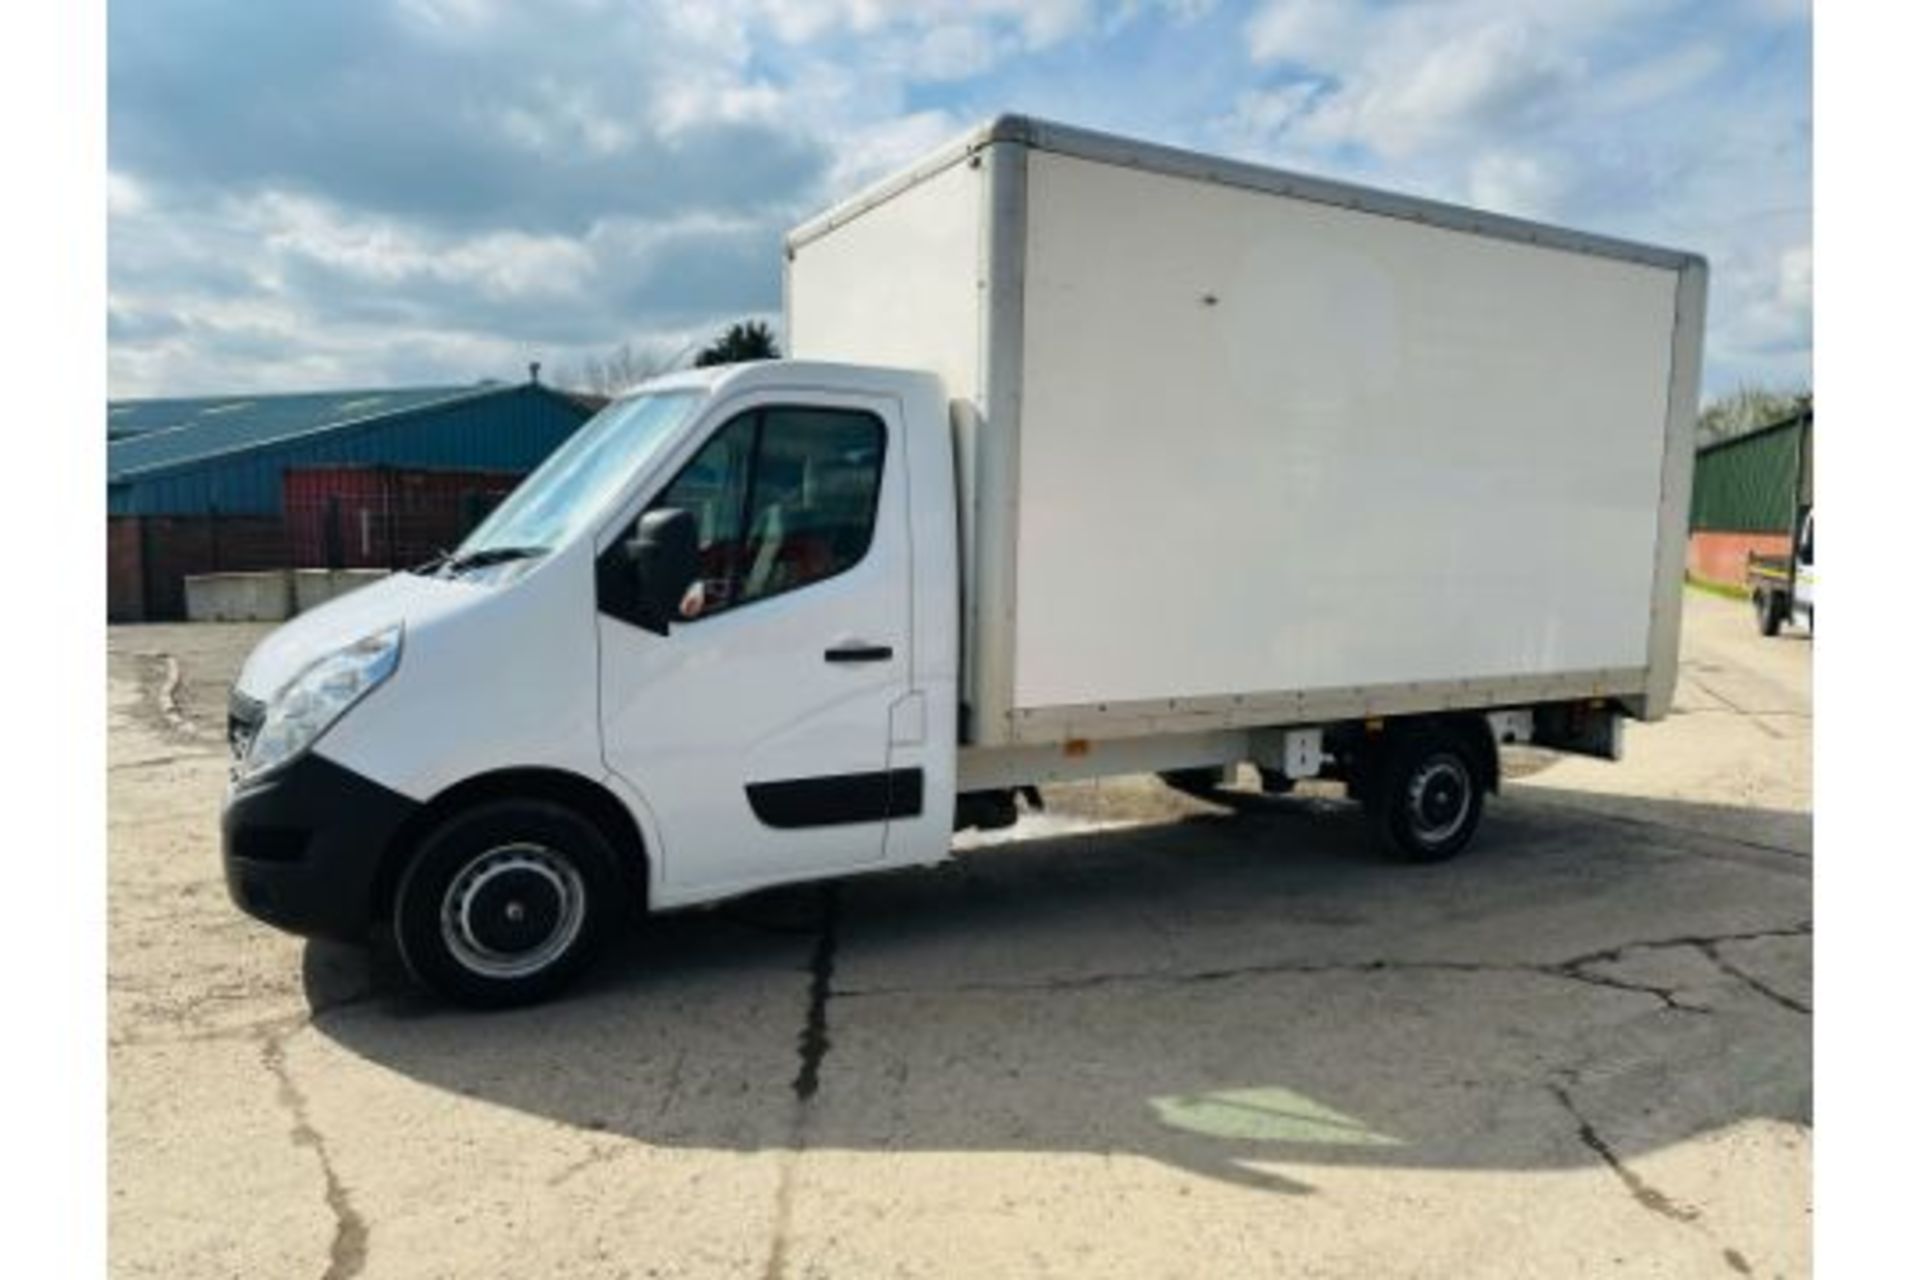 Reserve Met -RENAULT MASTER 2.3DCI (130) Business Edition Lwb Box Van With Electric Tail Lift 68 Reg - Image 2 of 27